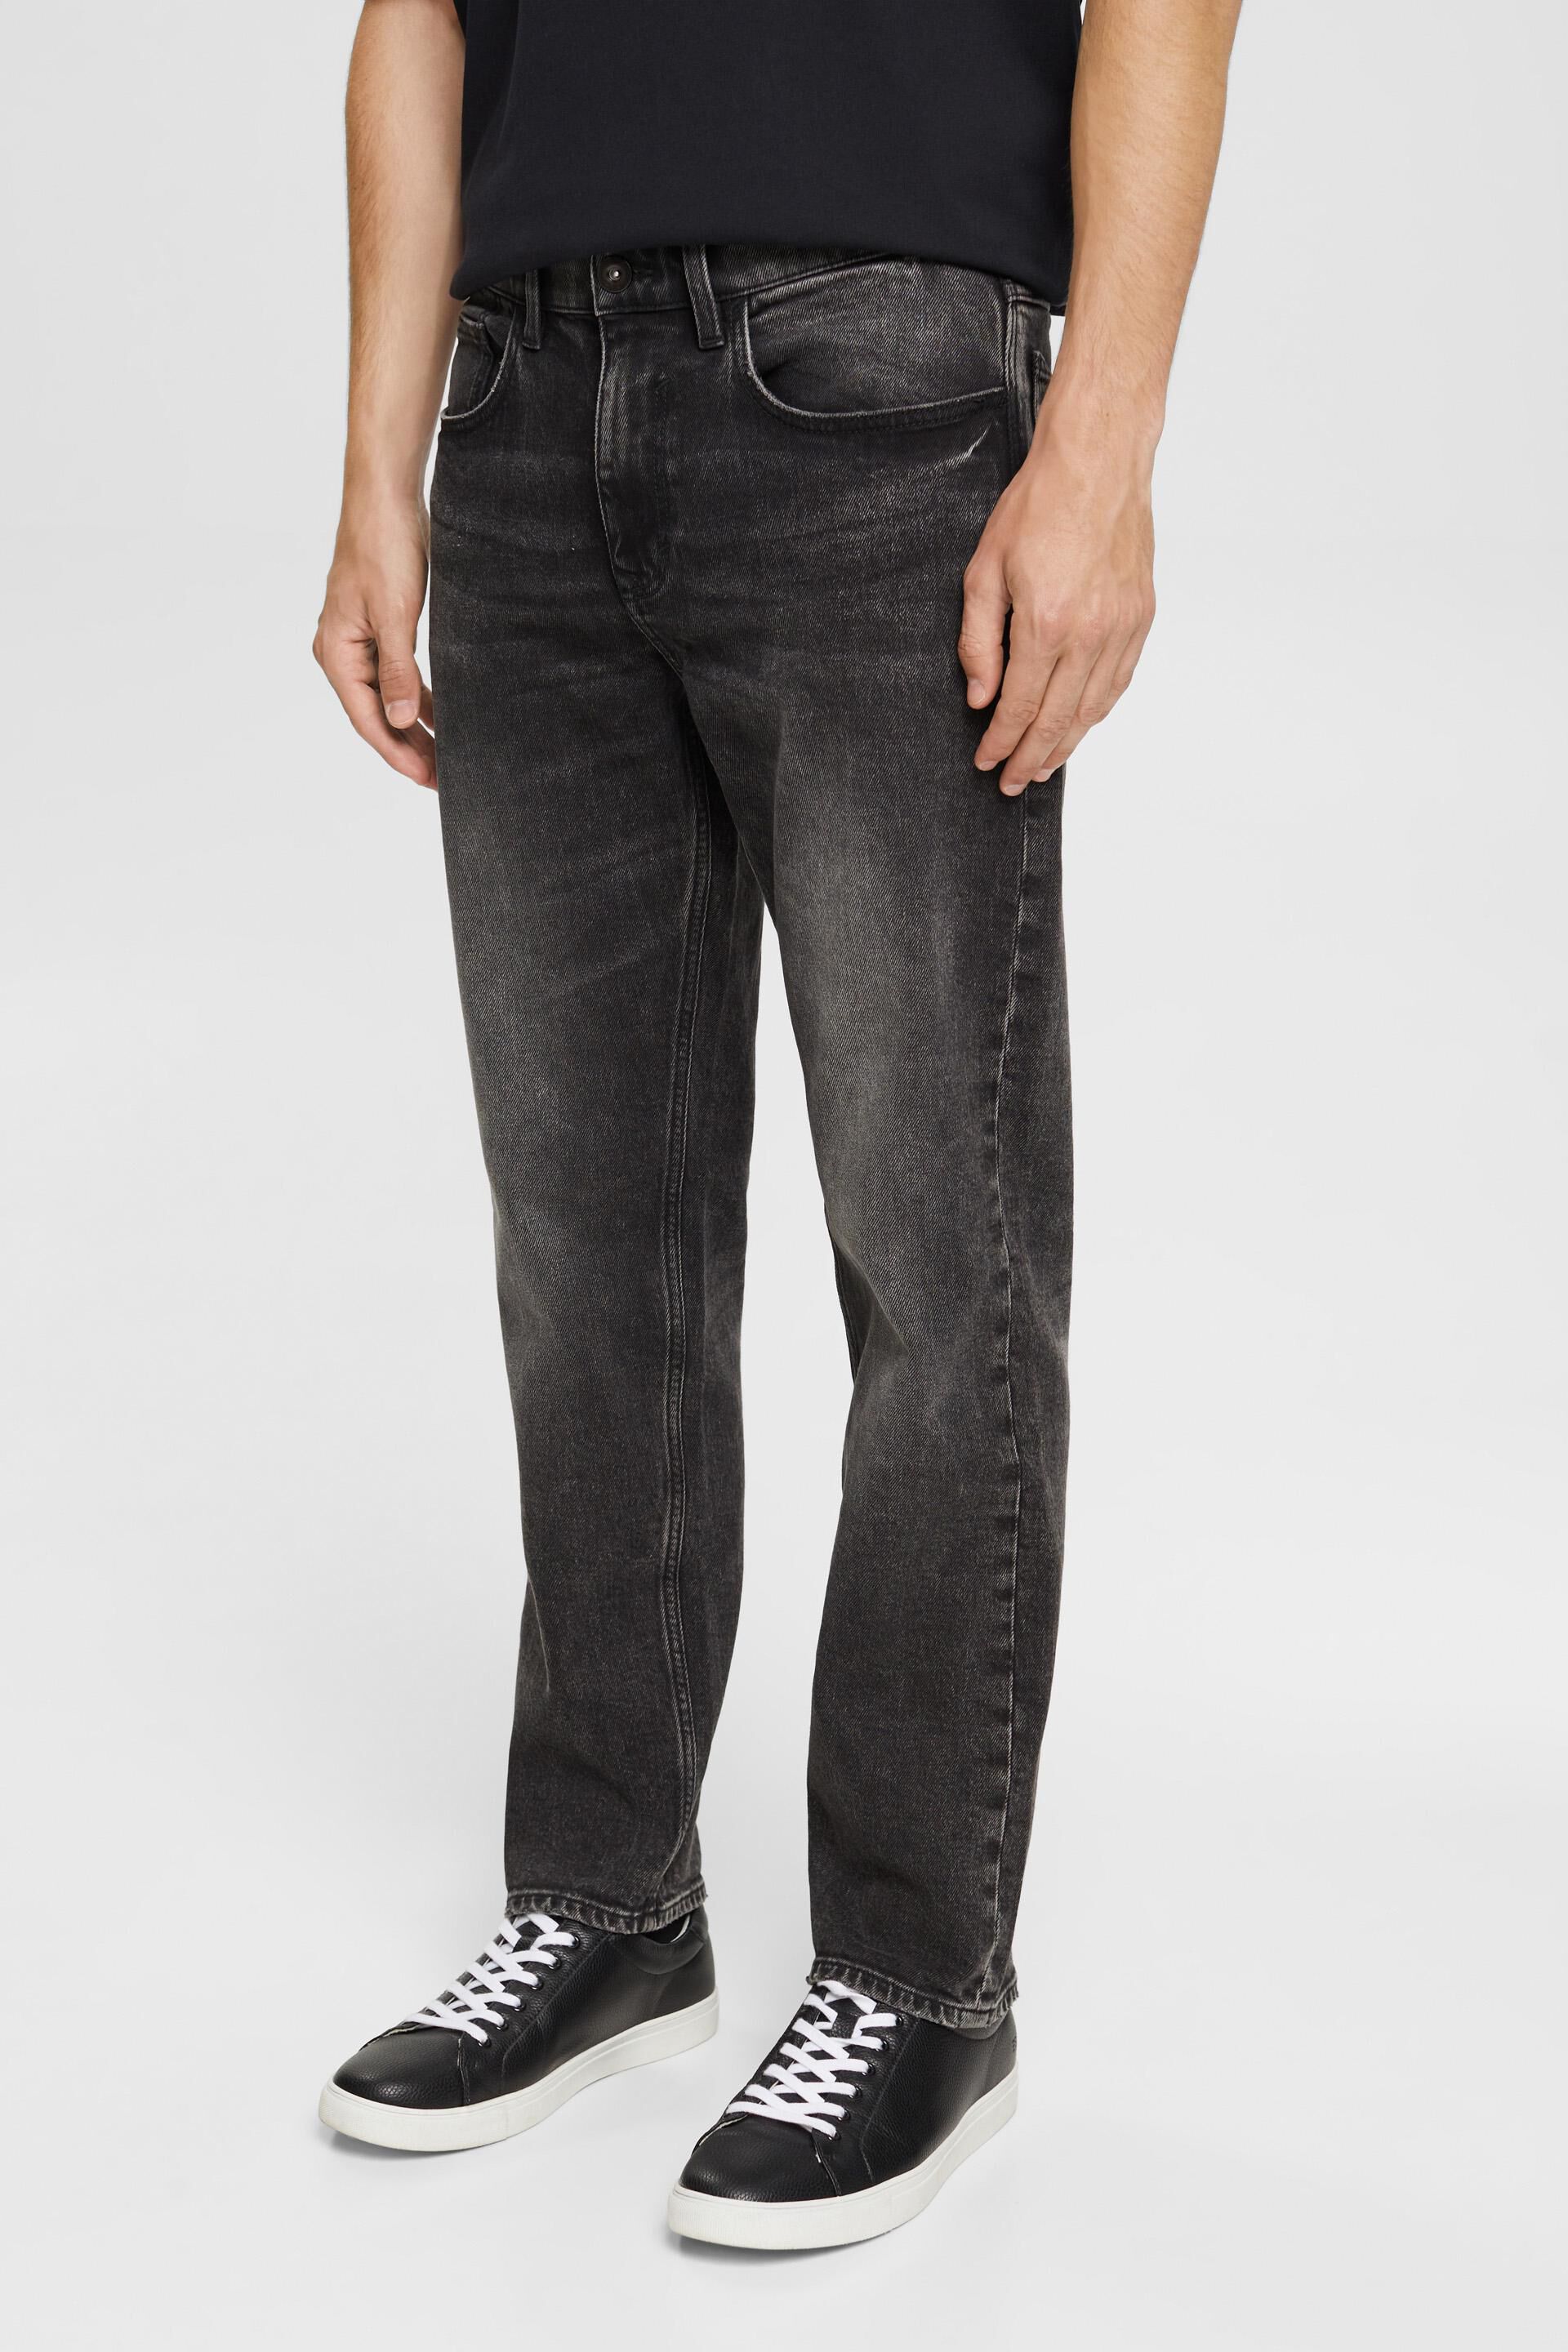 ESPRIT - Washed out jeans our shop online at stretch